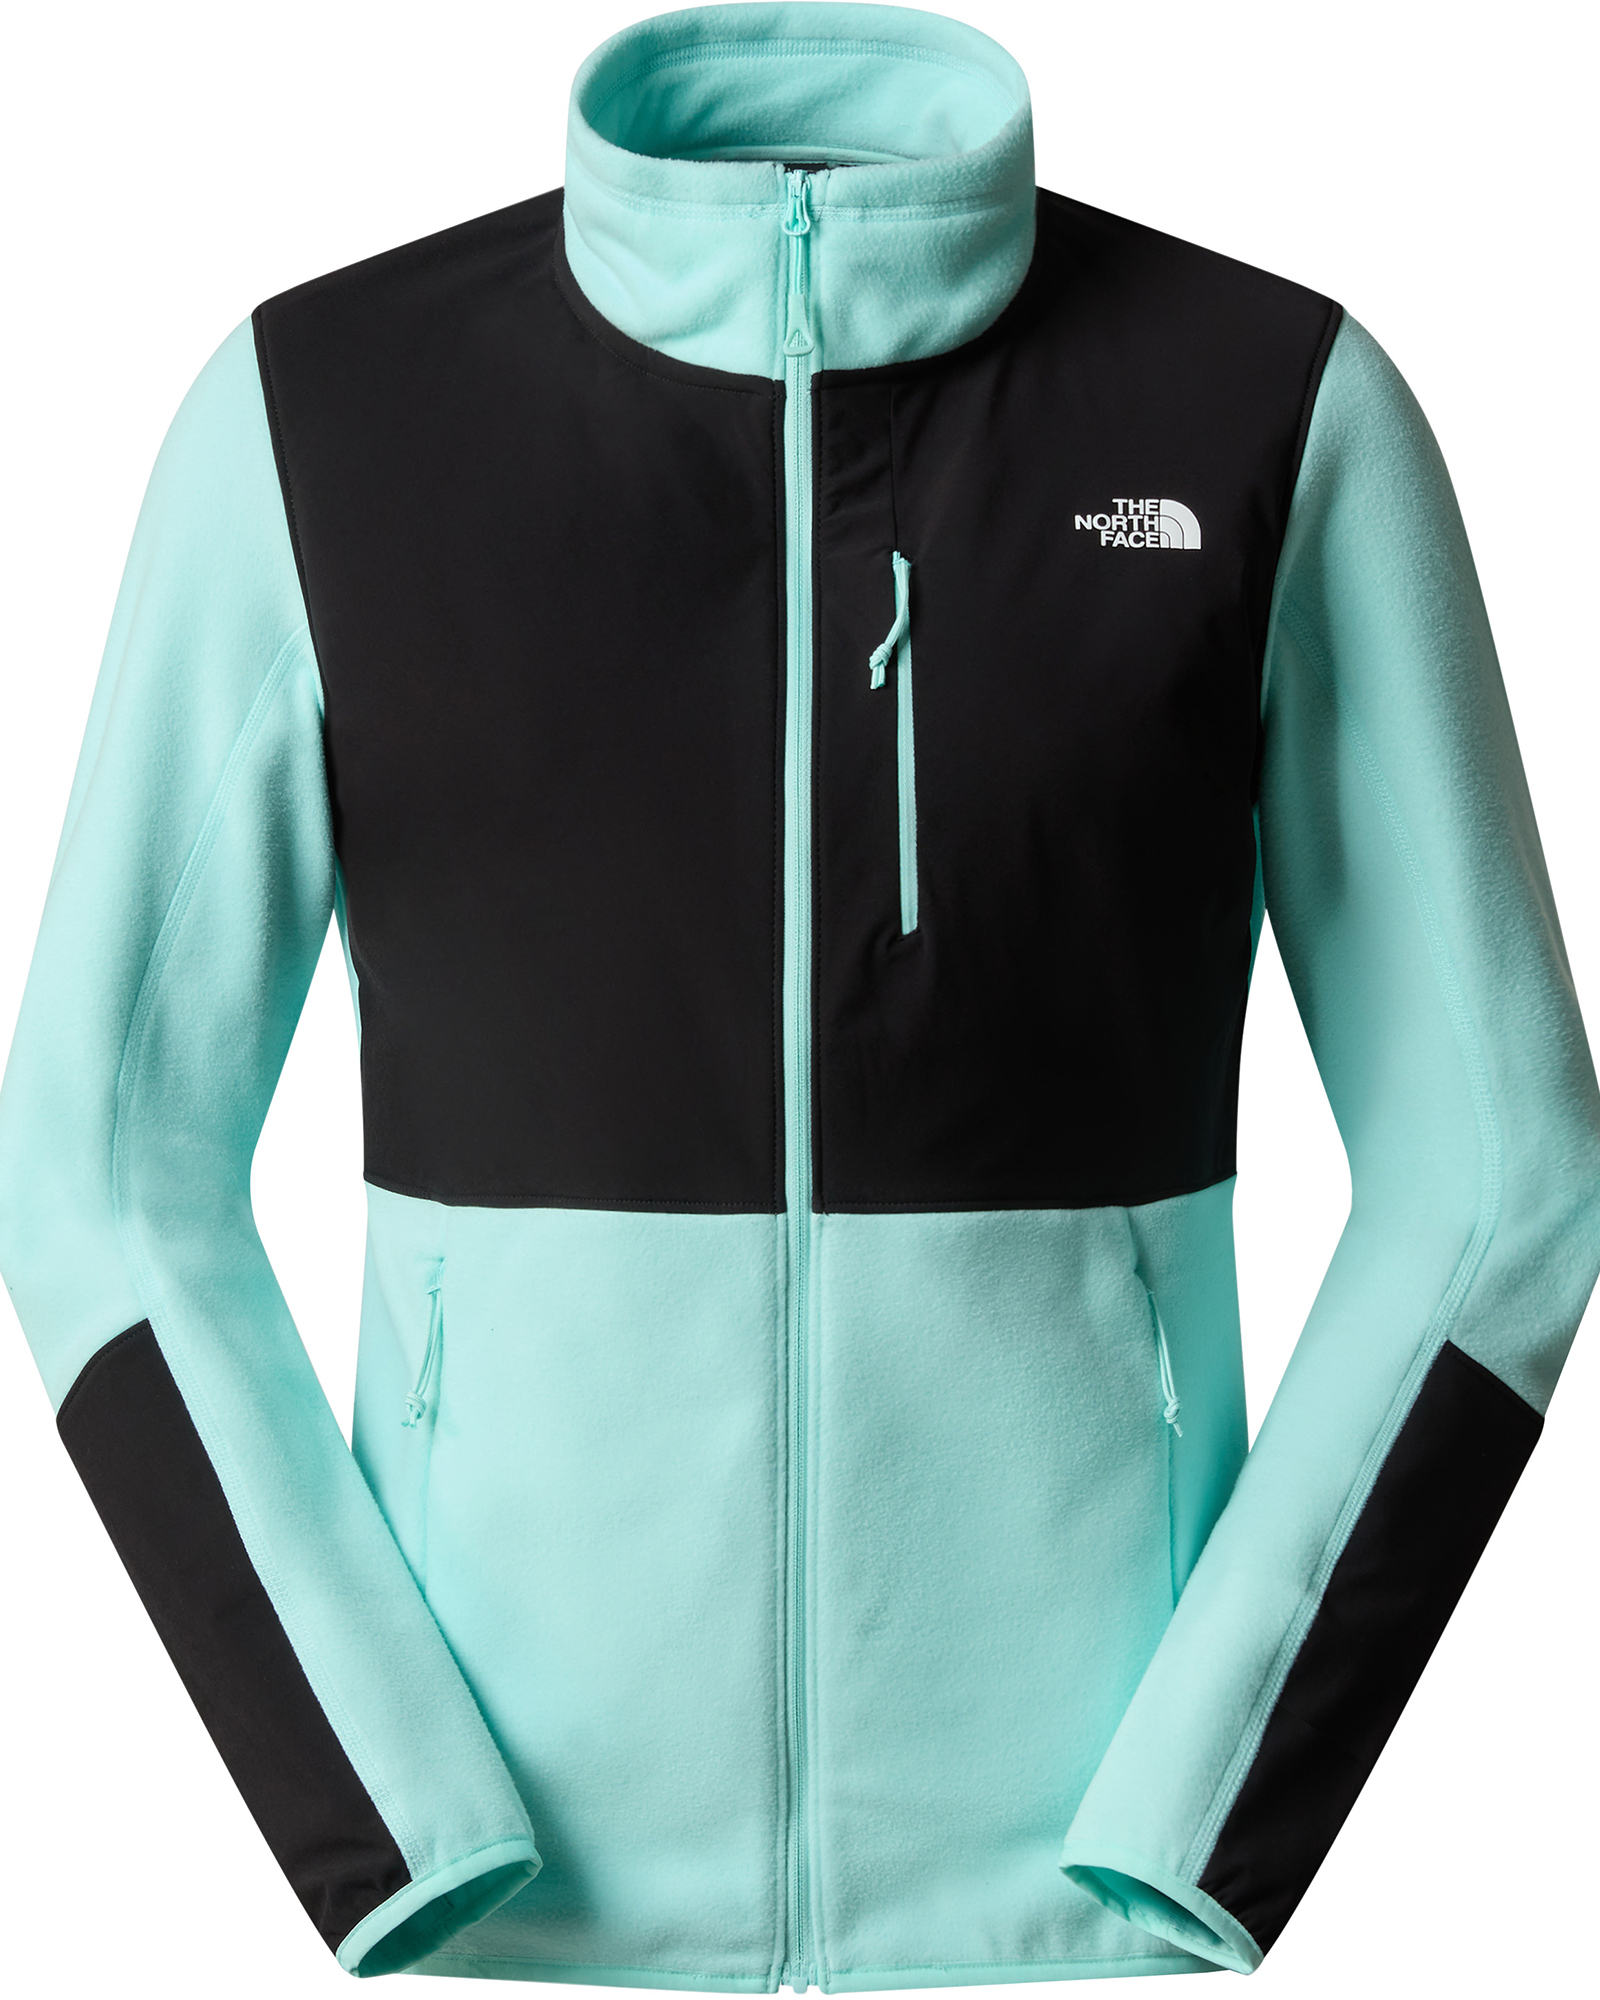 The North Face Diablo Women’s Mid Layer Jacket - Powder Teal-TNF Black M